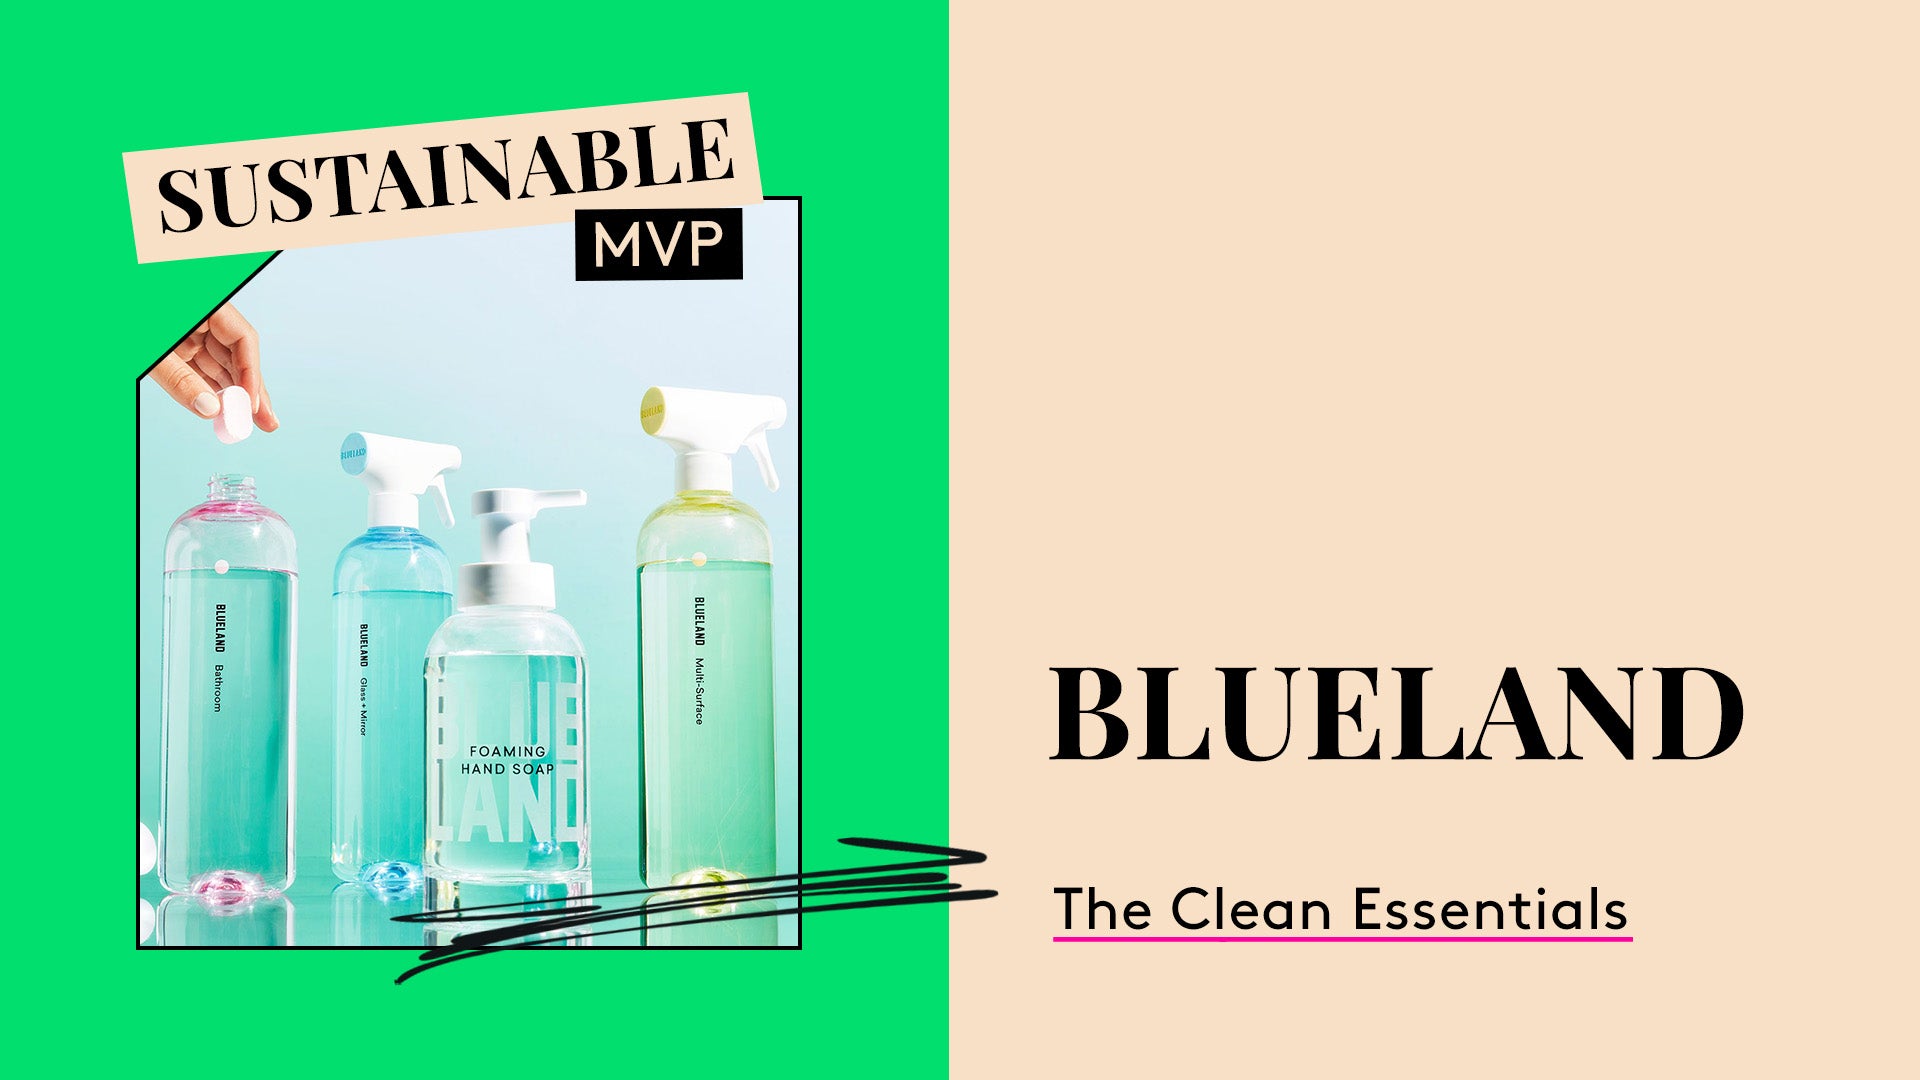 Sustainable Product MVP. Blueland The Clean Essentials.